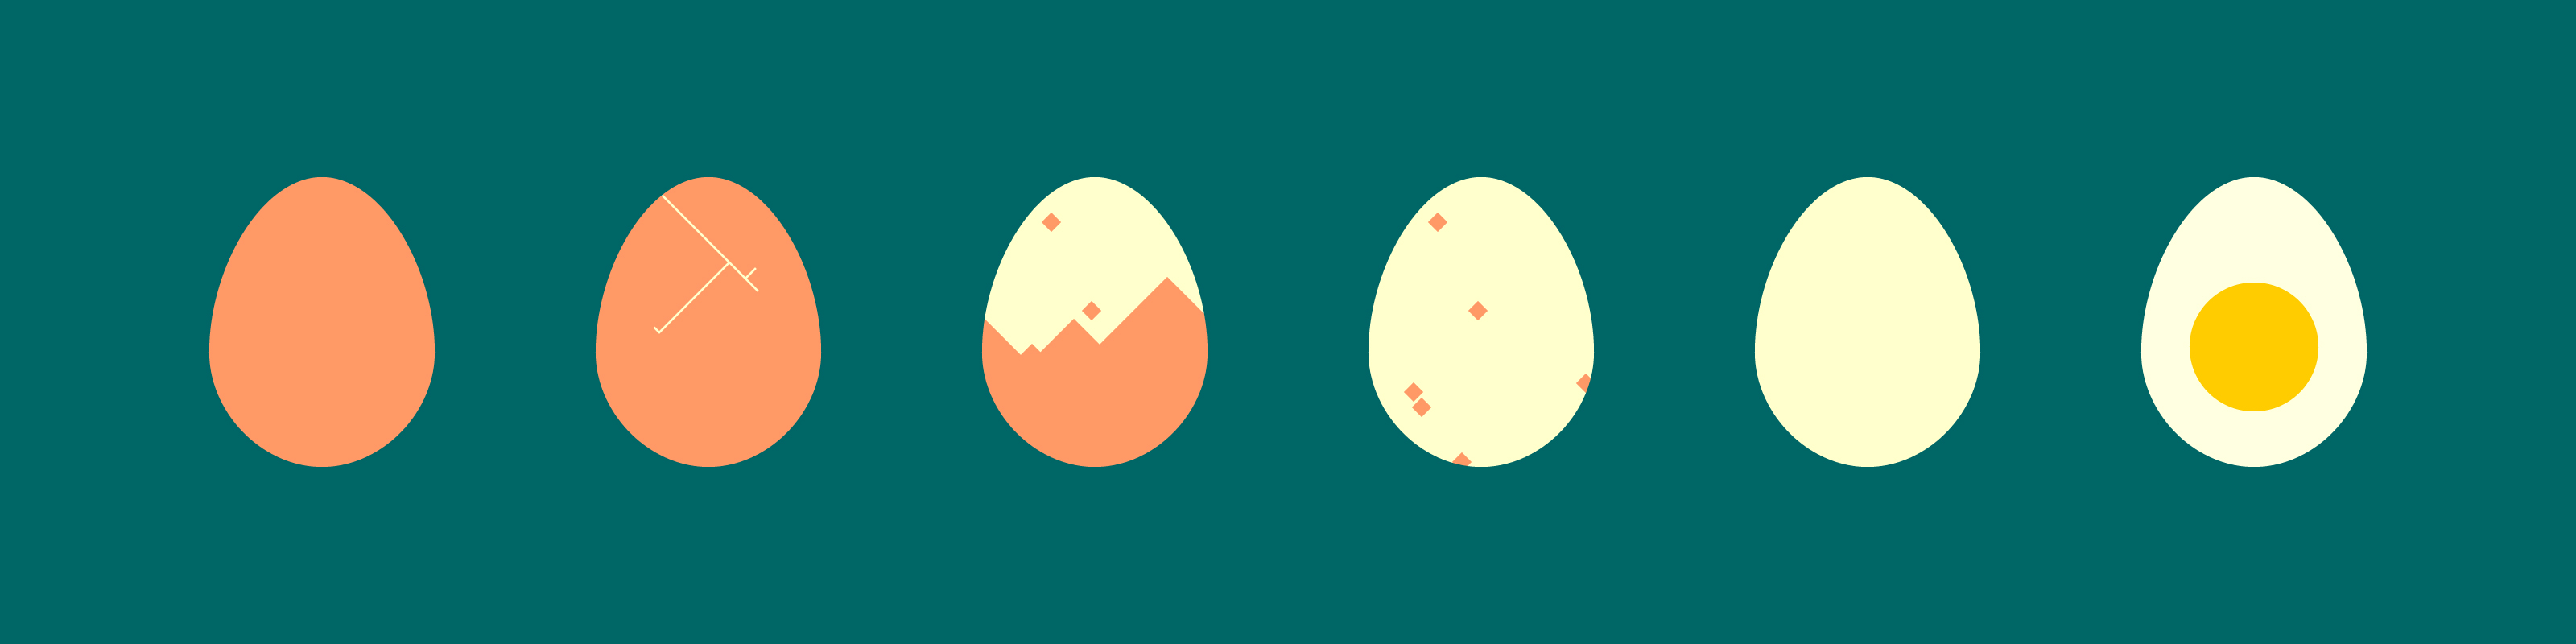 Illustration of a hard-boiled egg being peeled in six stages